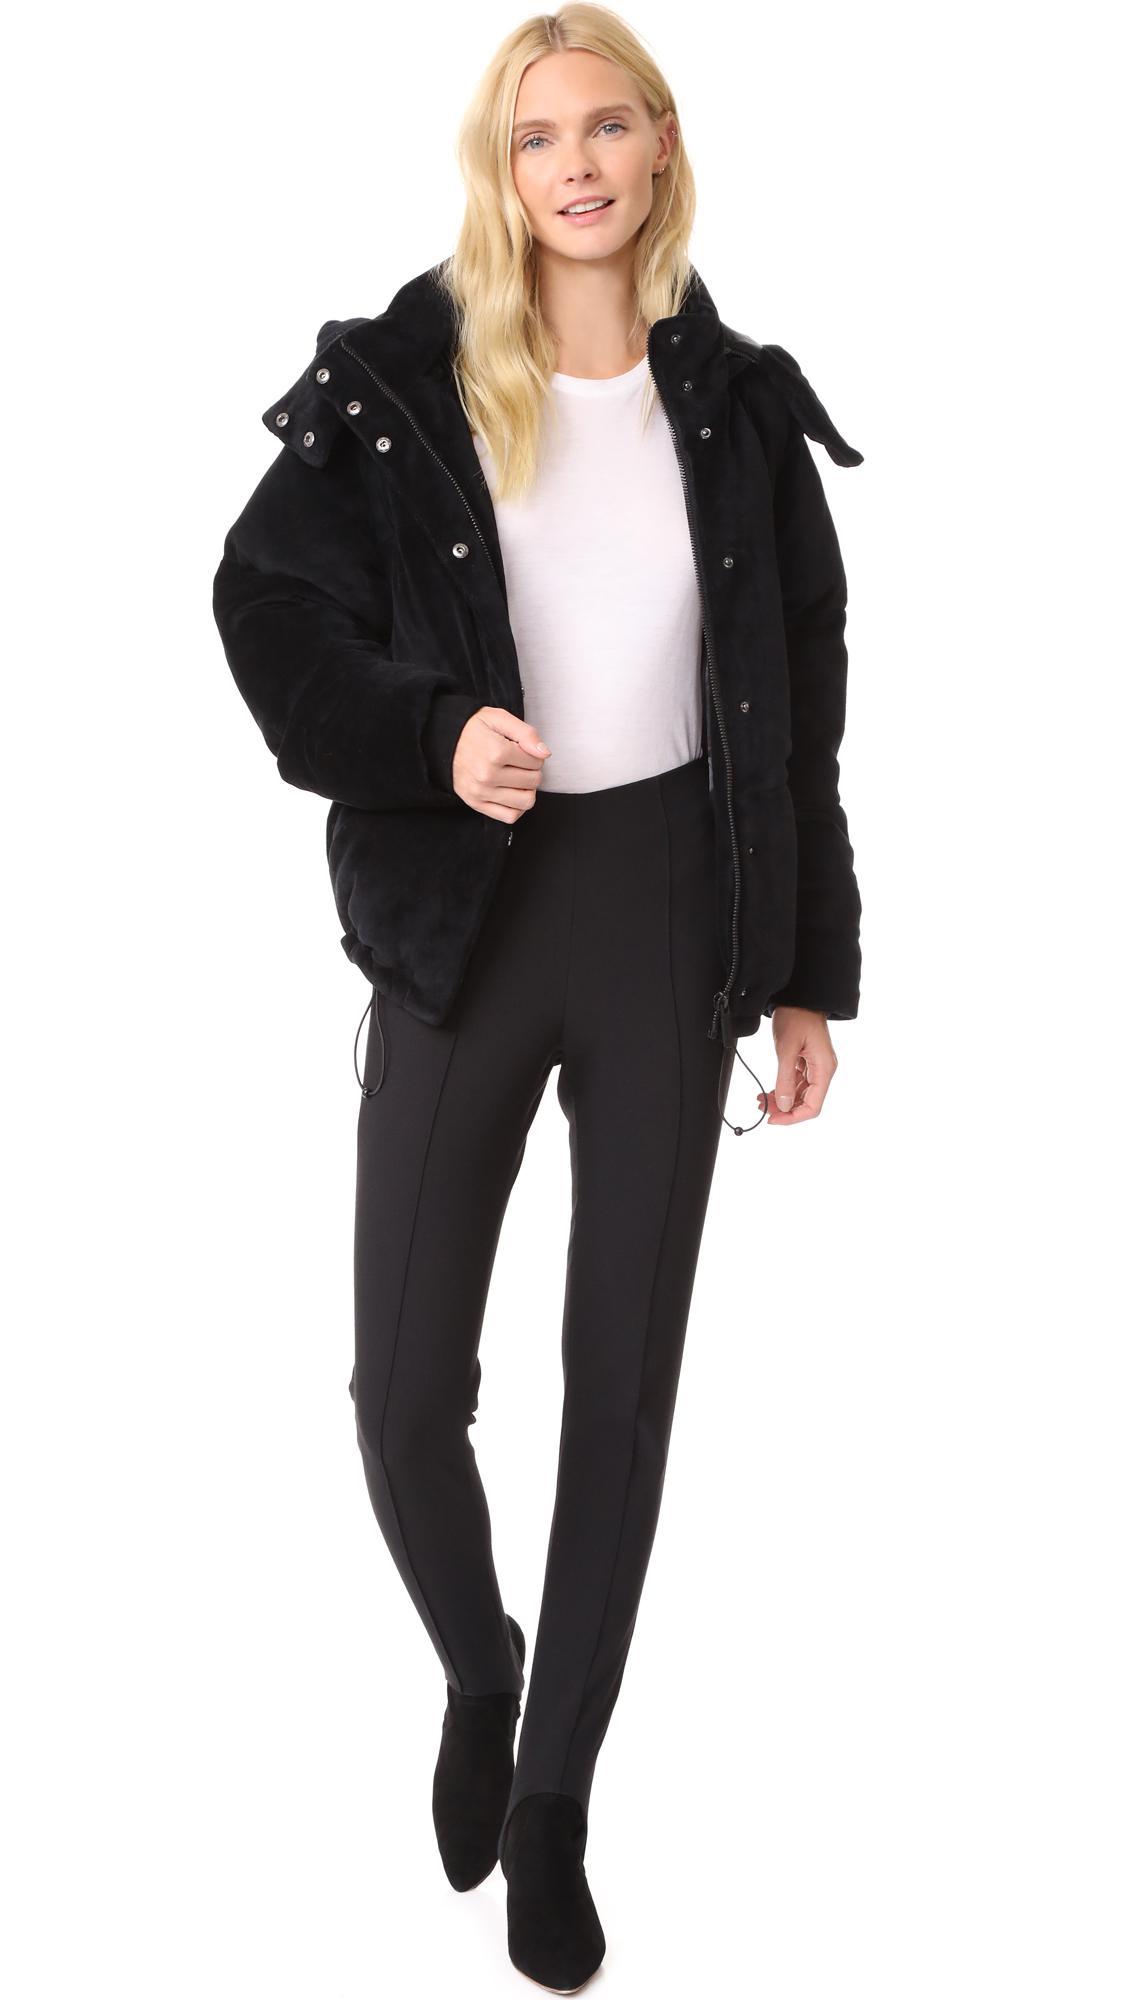 Lyst - Kendall + Kylie Velour Puffer Jacket in Black